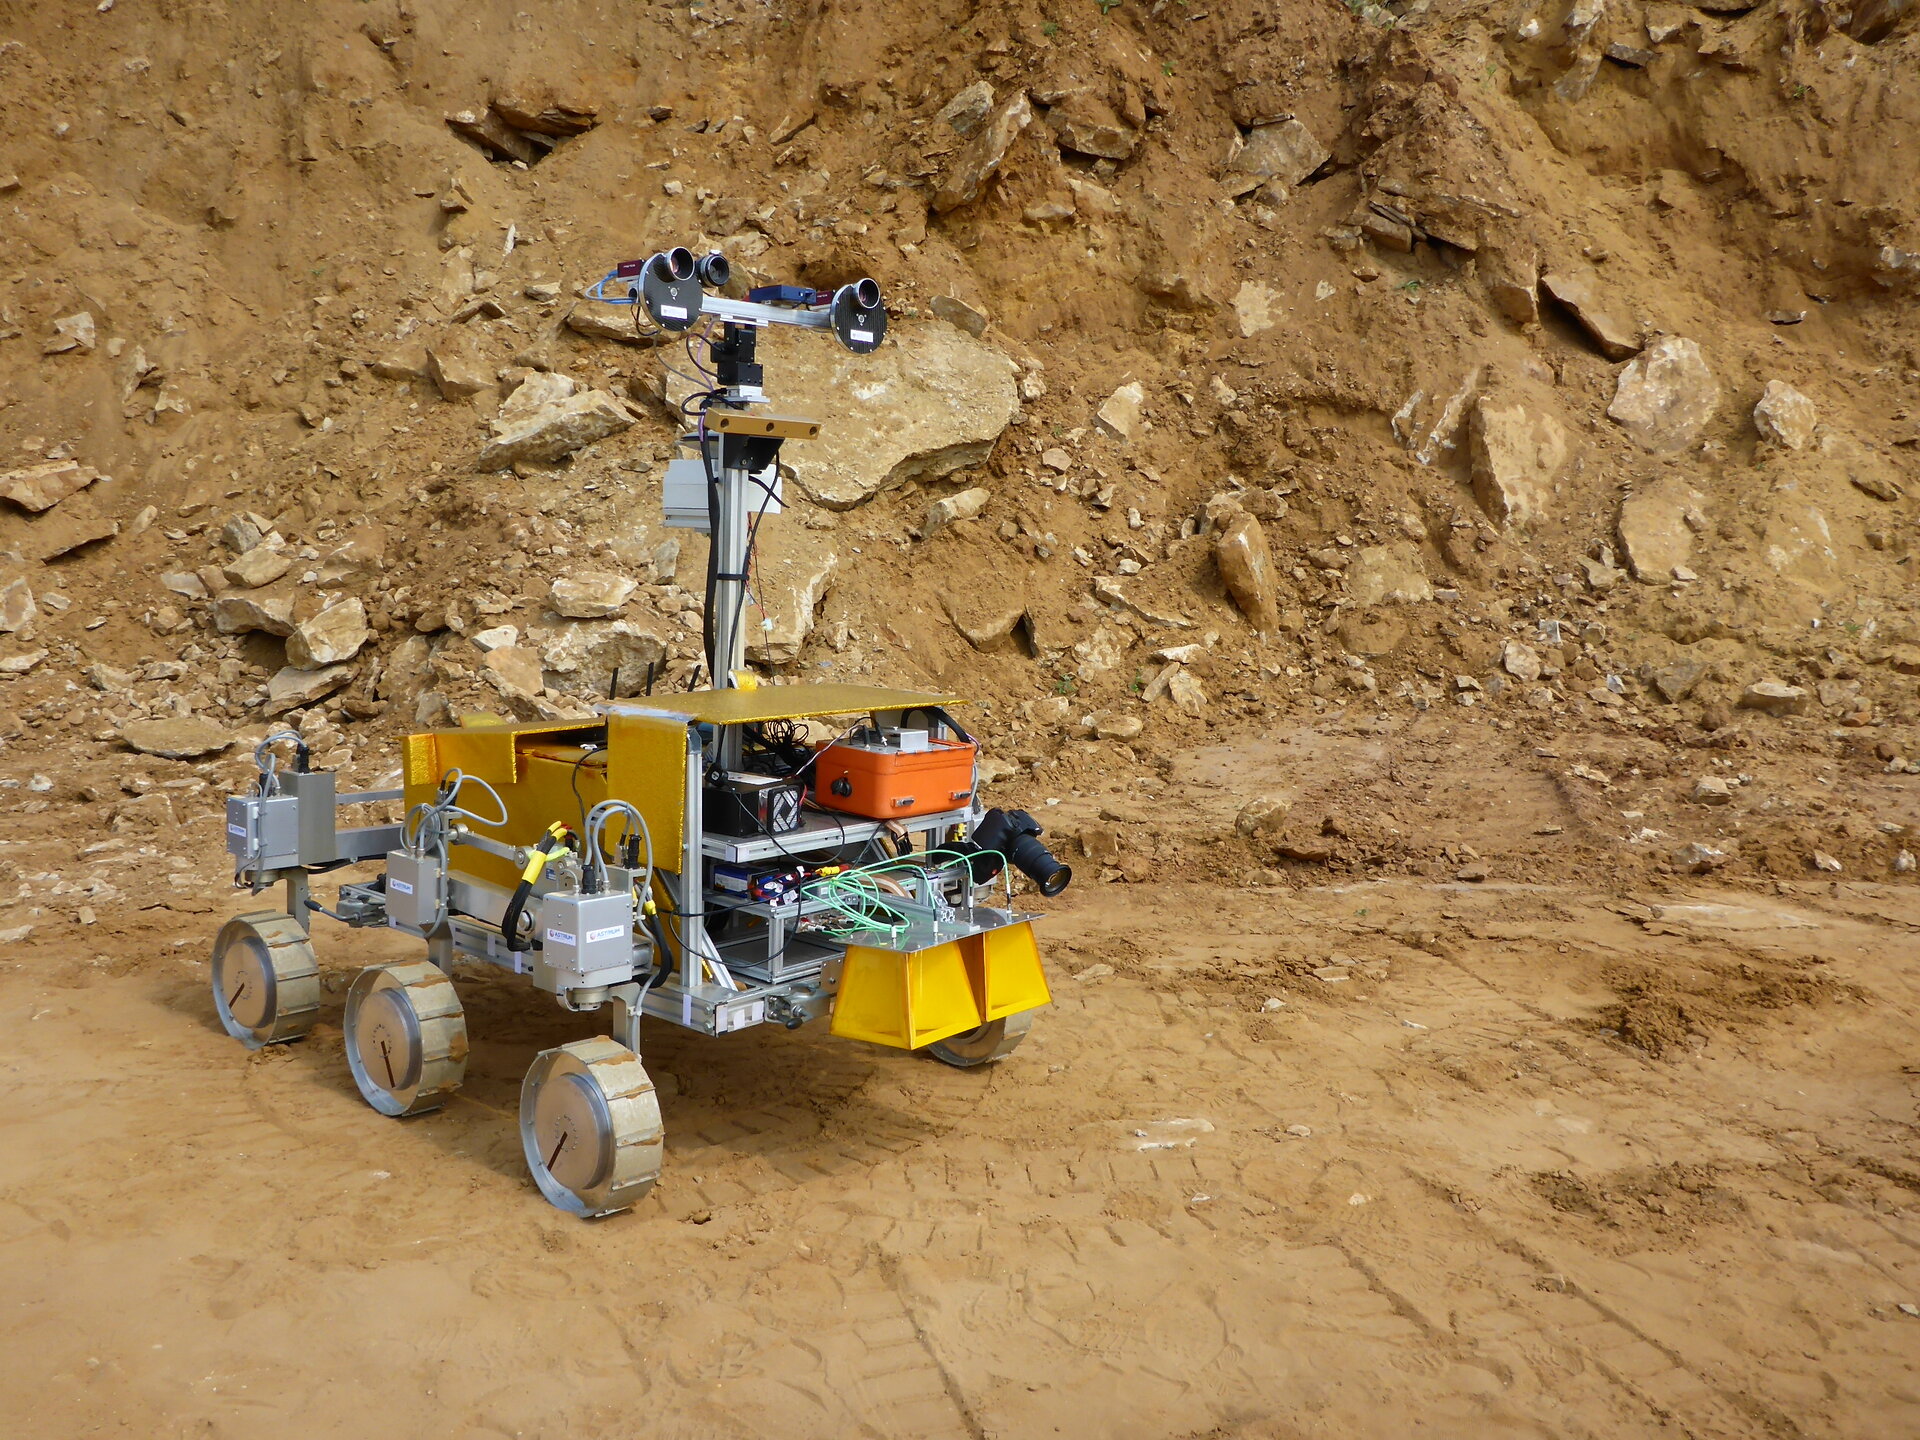 Rover test